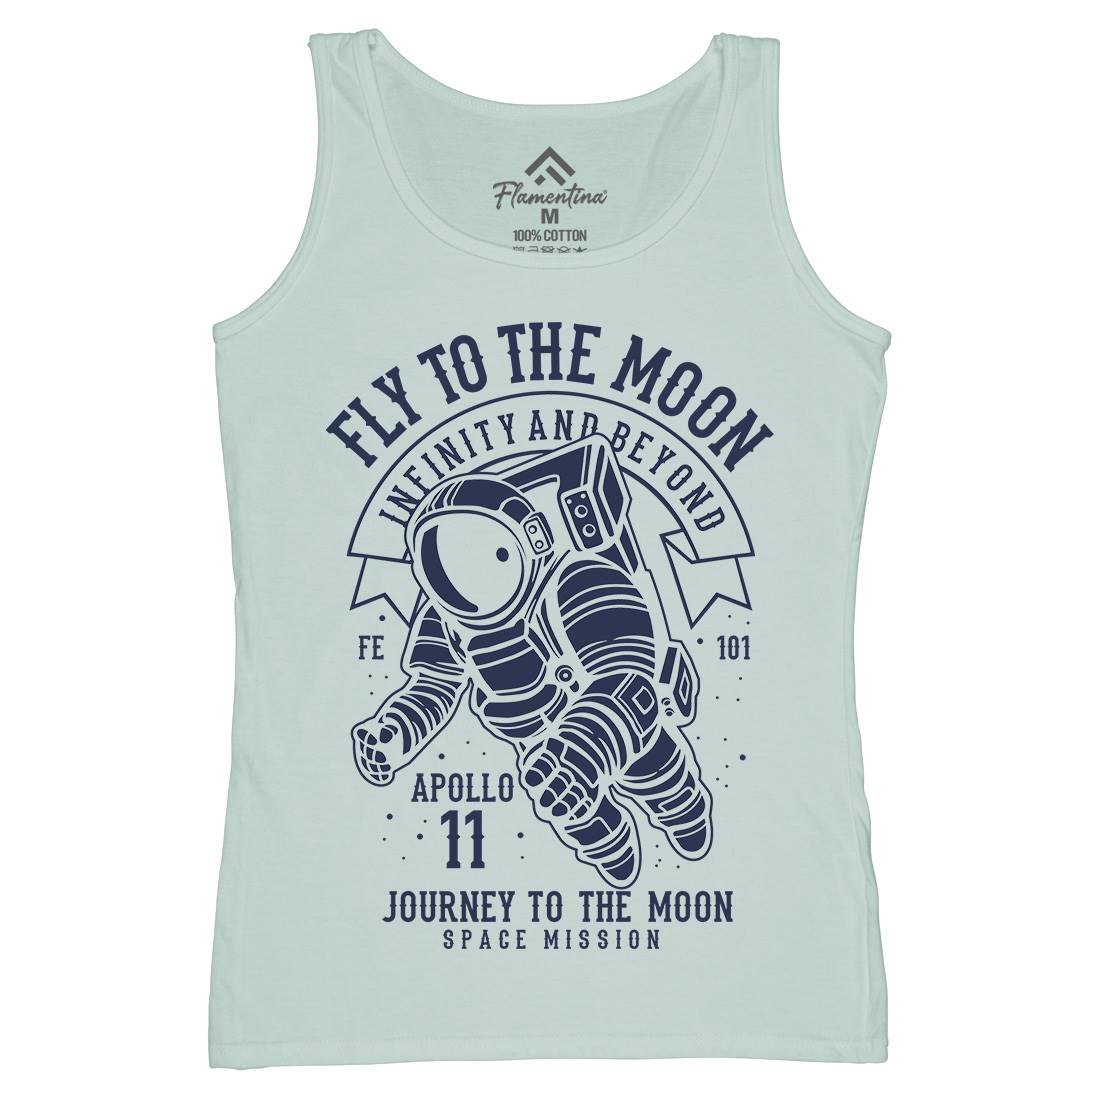 Fly To The Moon Womens Organic Tank Top Vest Space B210